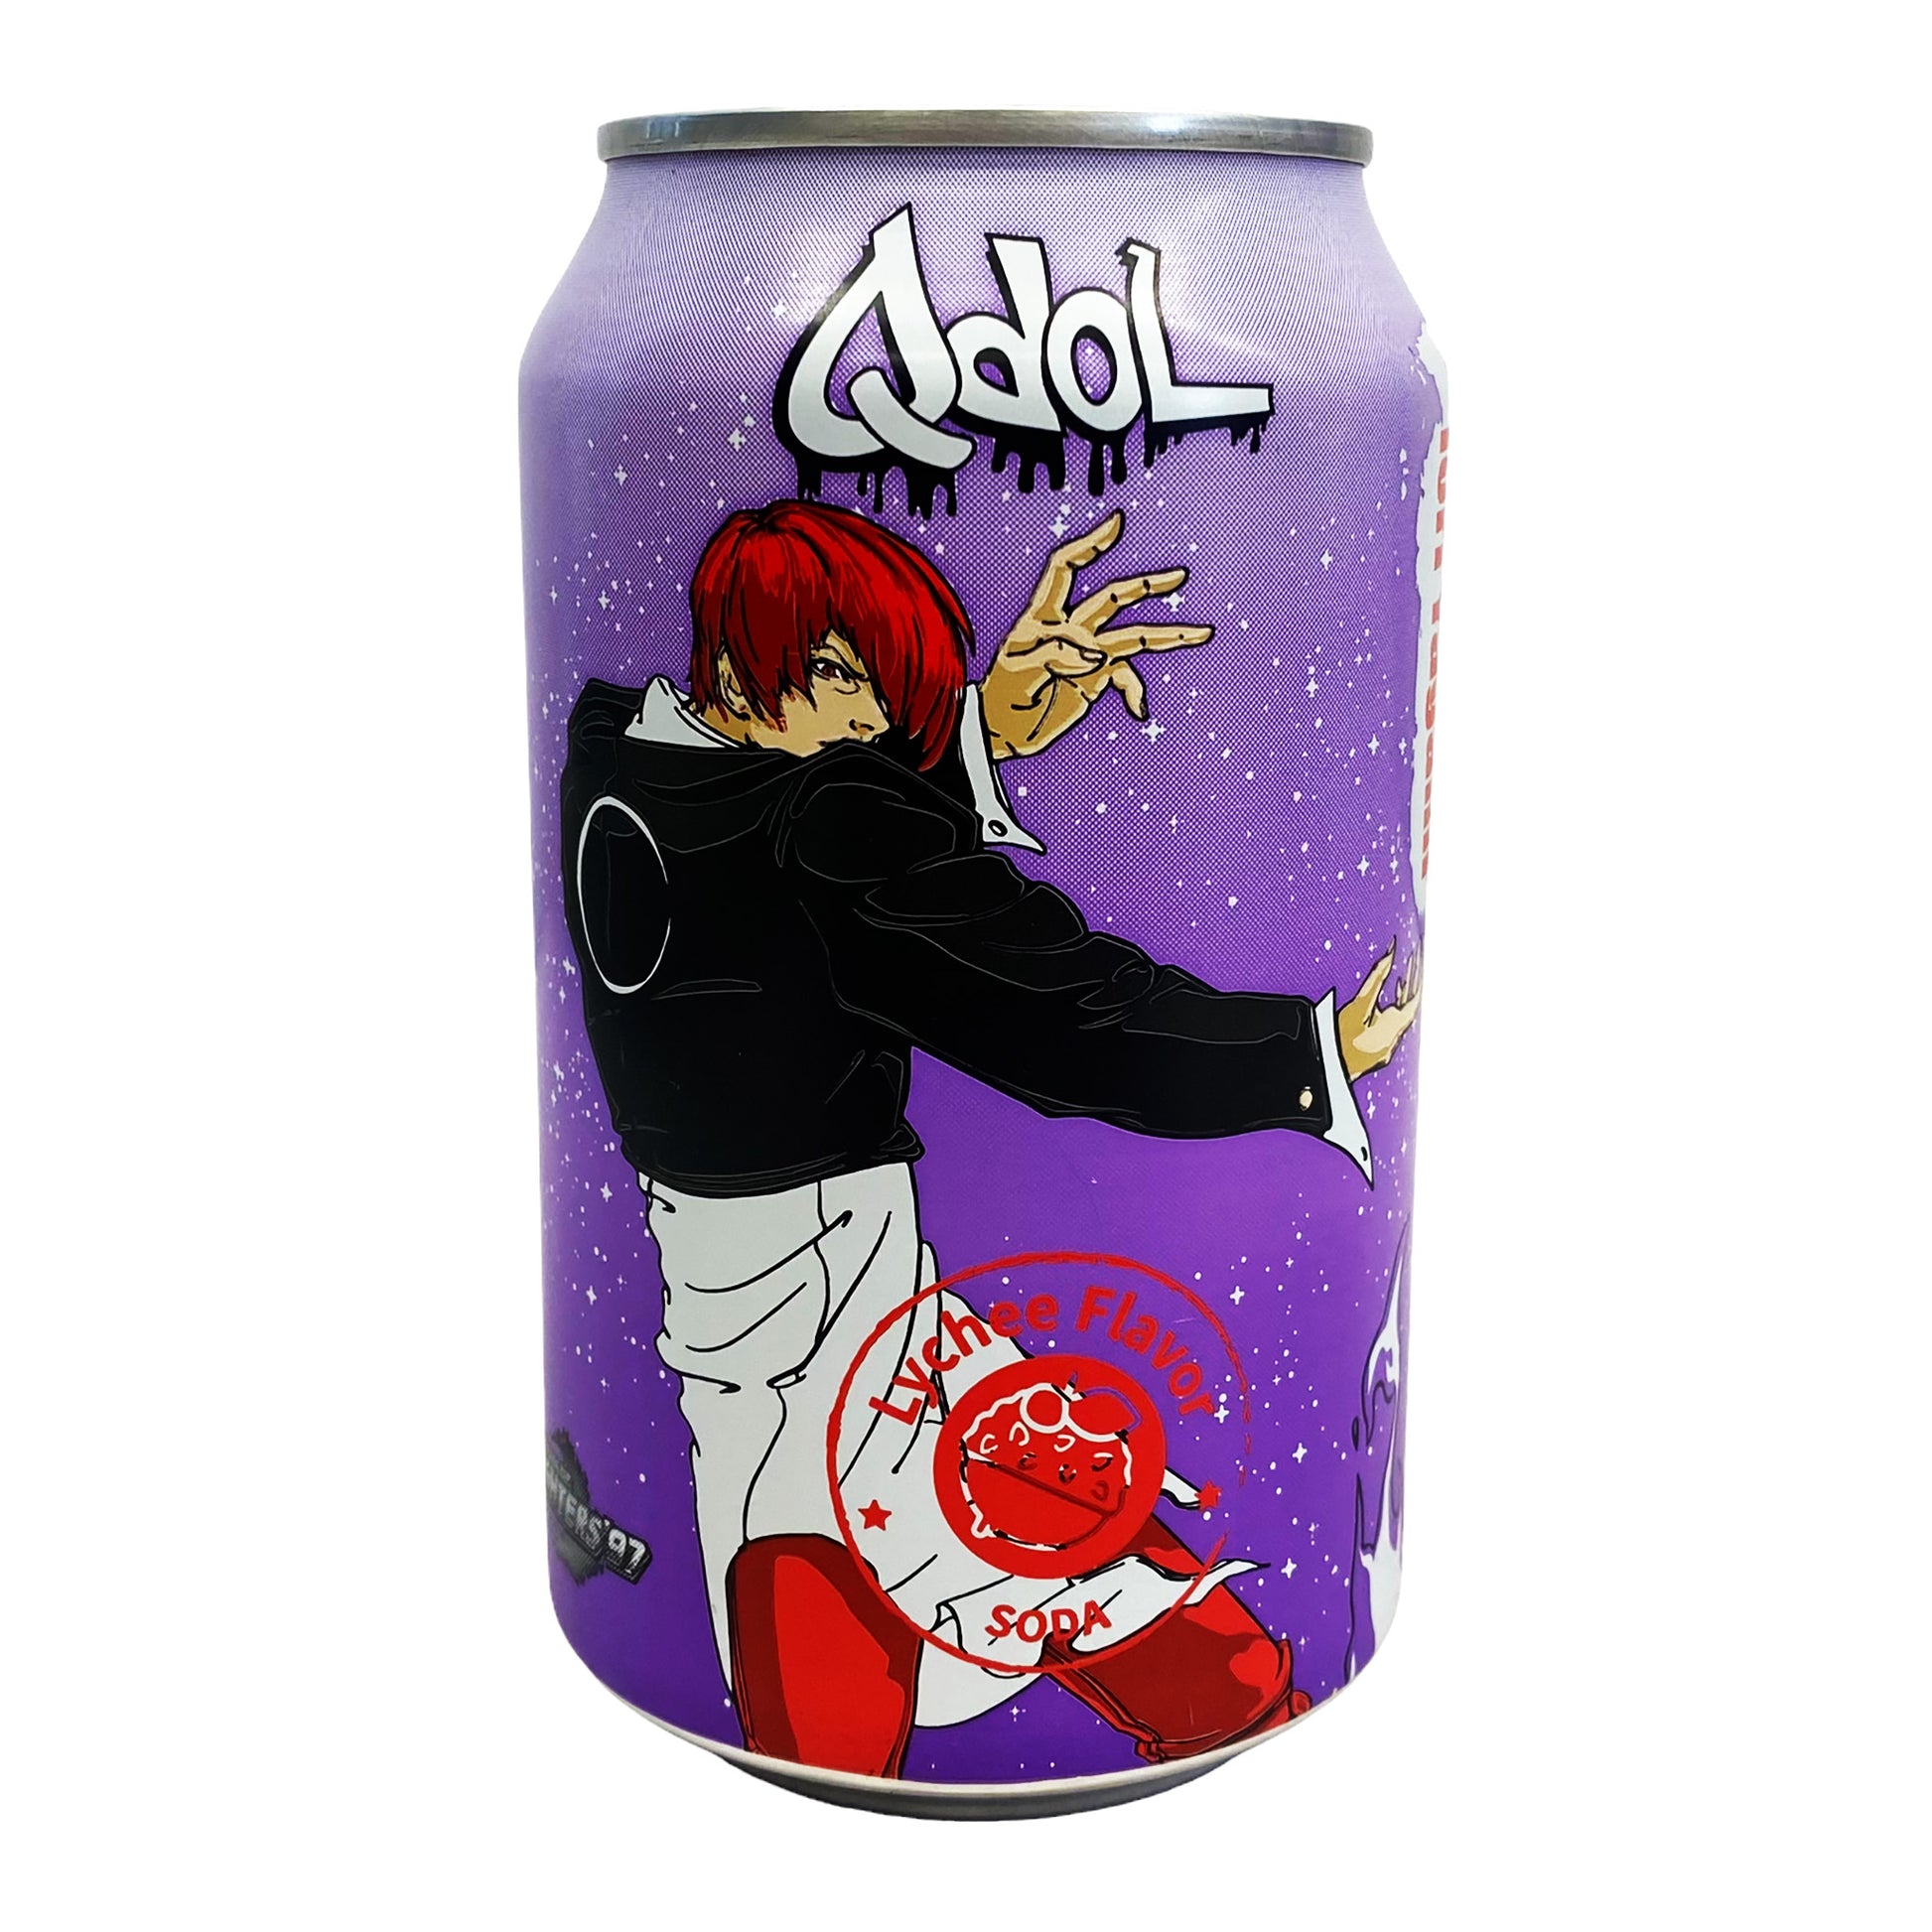 Front graphic image of QDOL Iori Yagami The King of Fighters '97 Soda - Lychee Flavor 11.1oz (330ml)